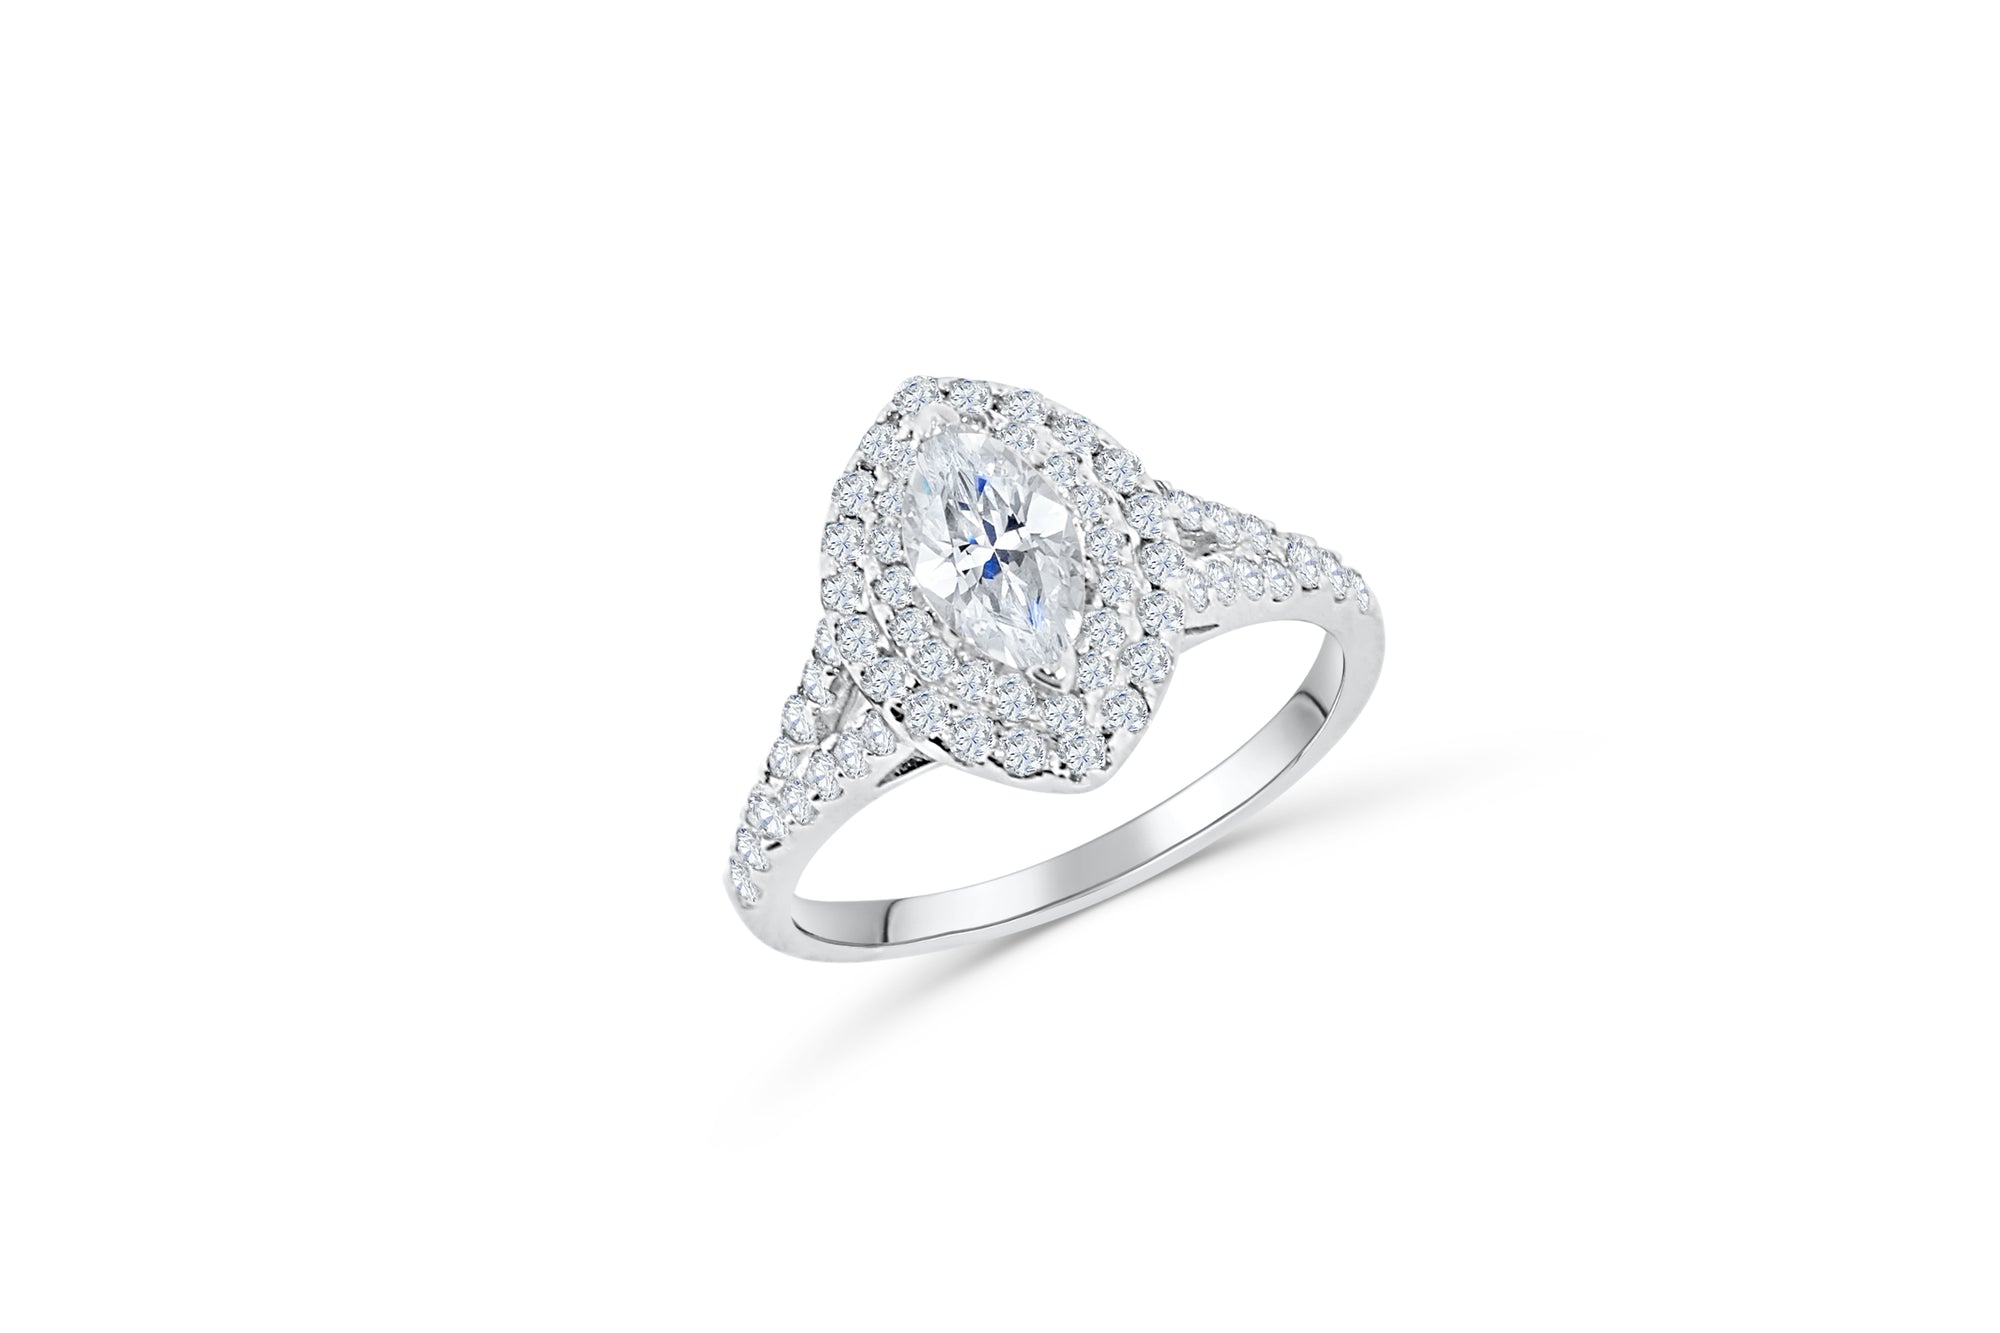 Marquise Diamond Engagement Ring 2.34 ct tw 14K White Gold DENG014 - NorthandSouthJewelry